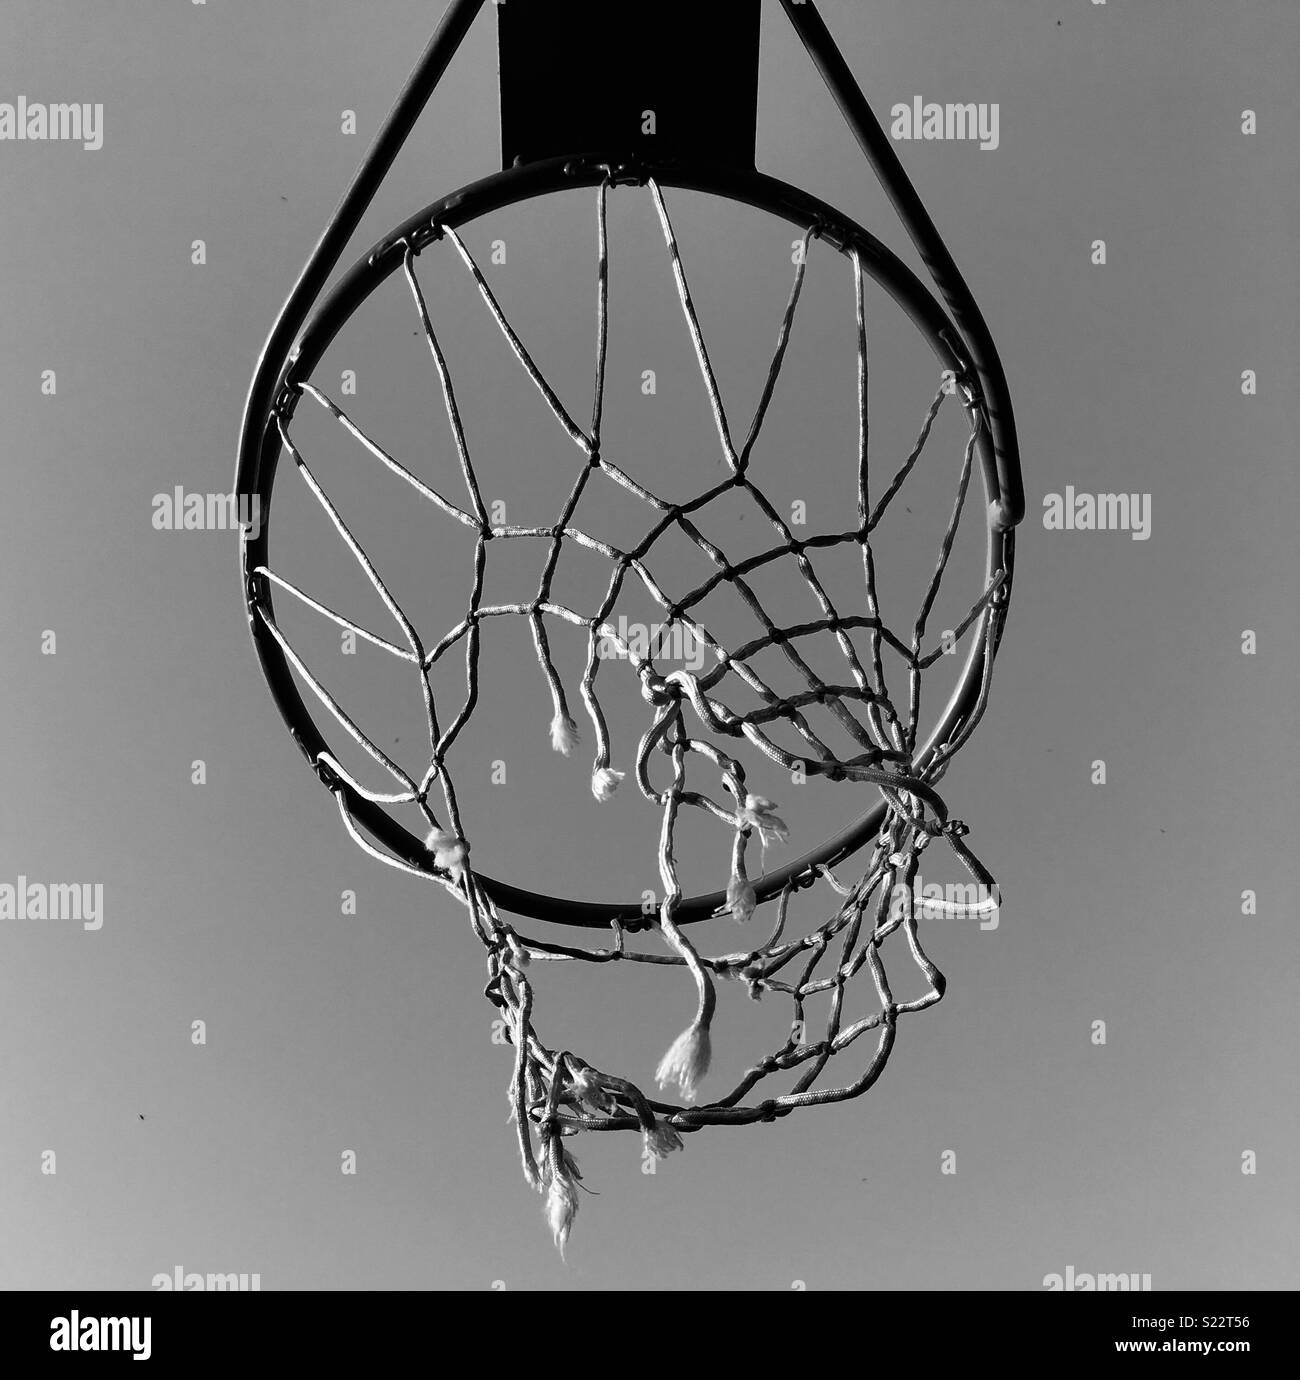 Basketball net Black and White Stock Photos & Images - Alamy